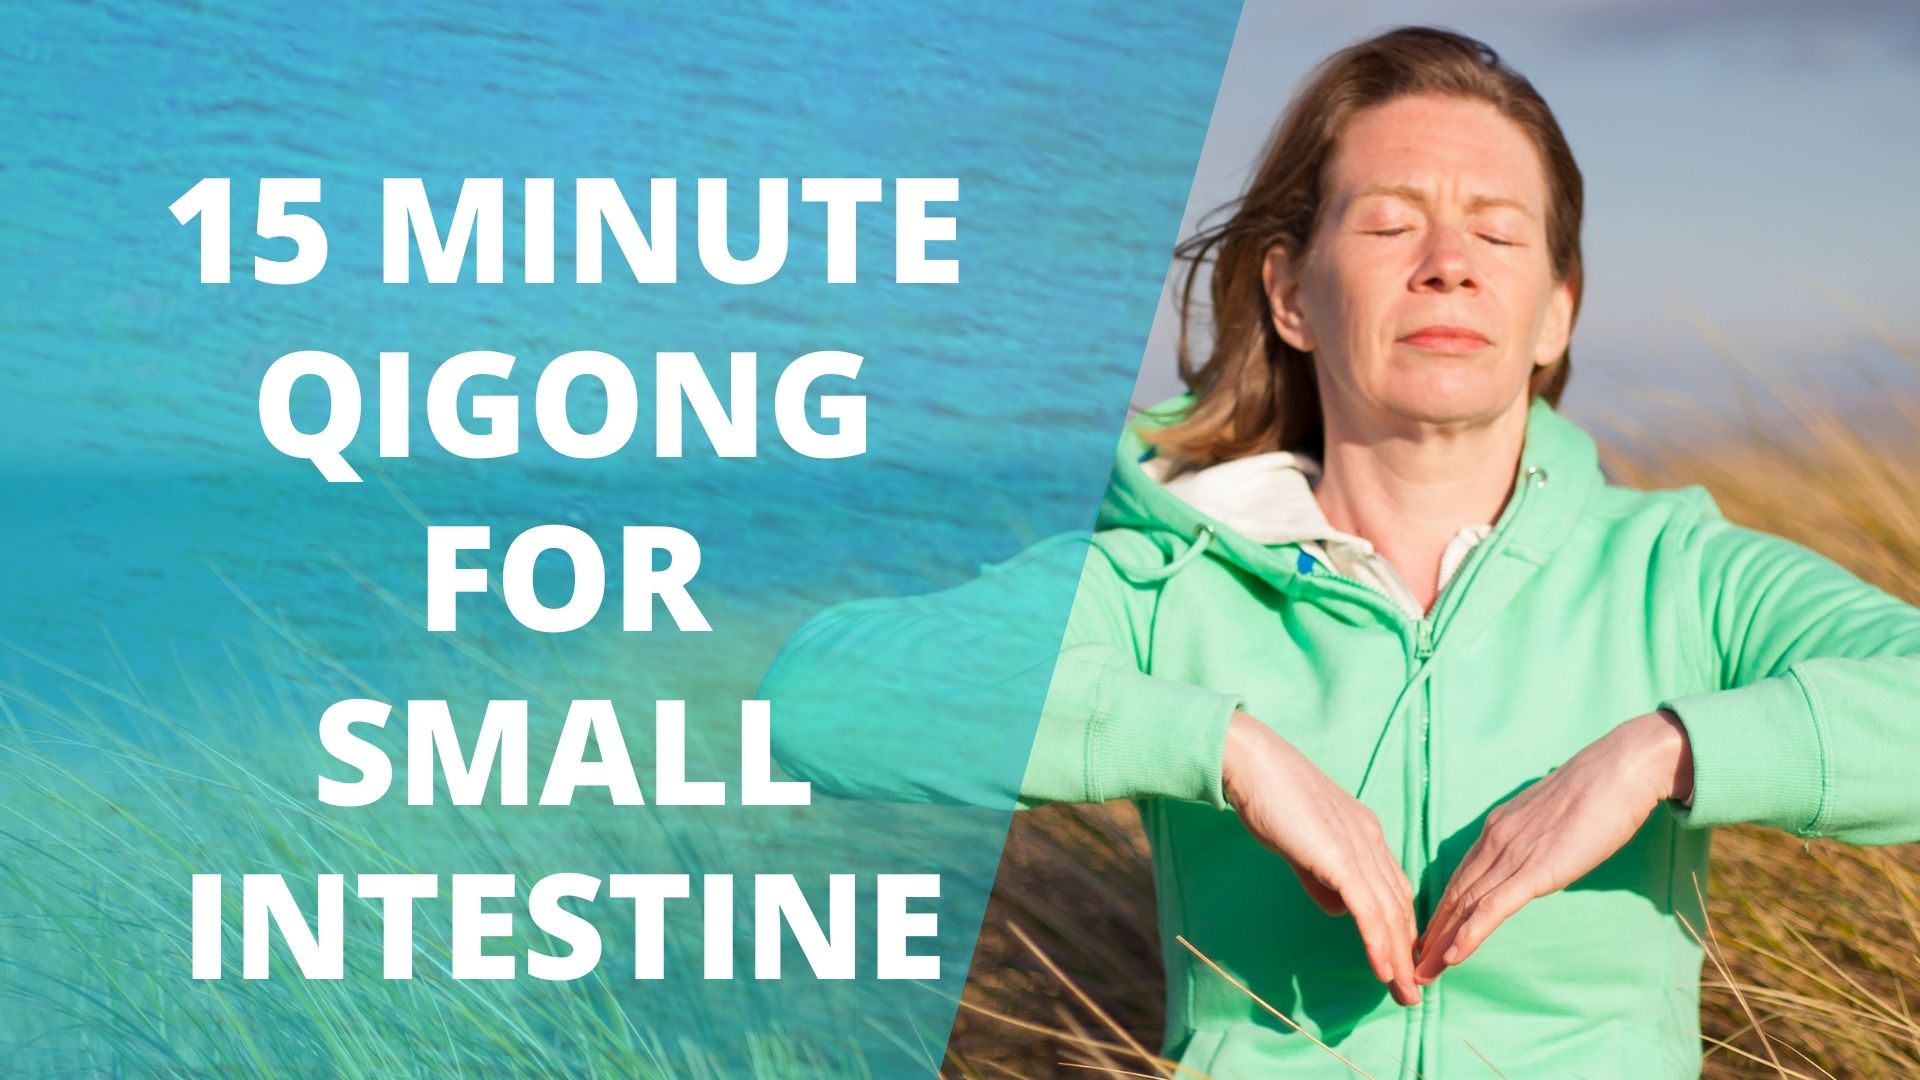 15 Minute Qigong For Small Intestine, digestion and clear thinking.